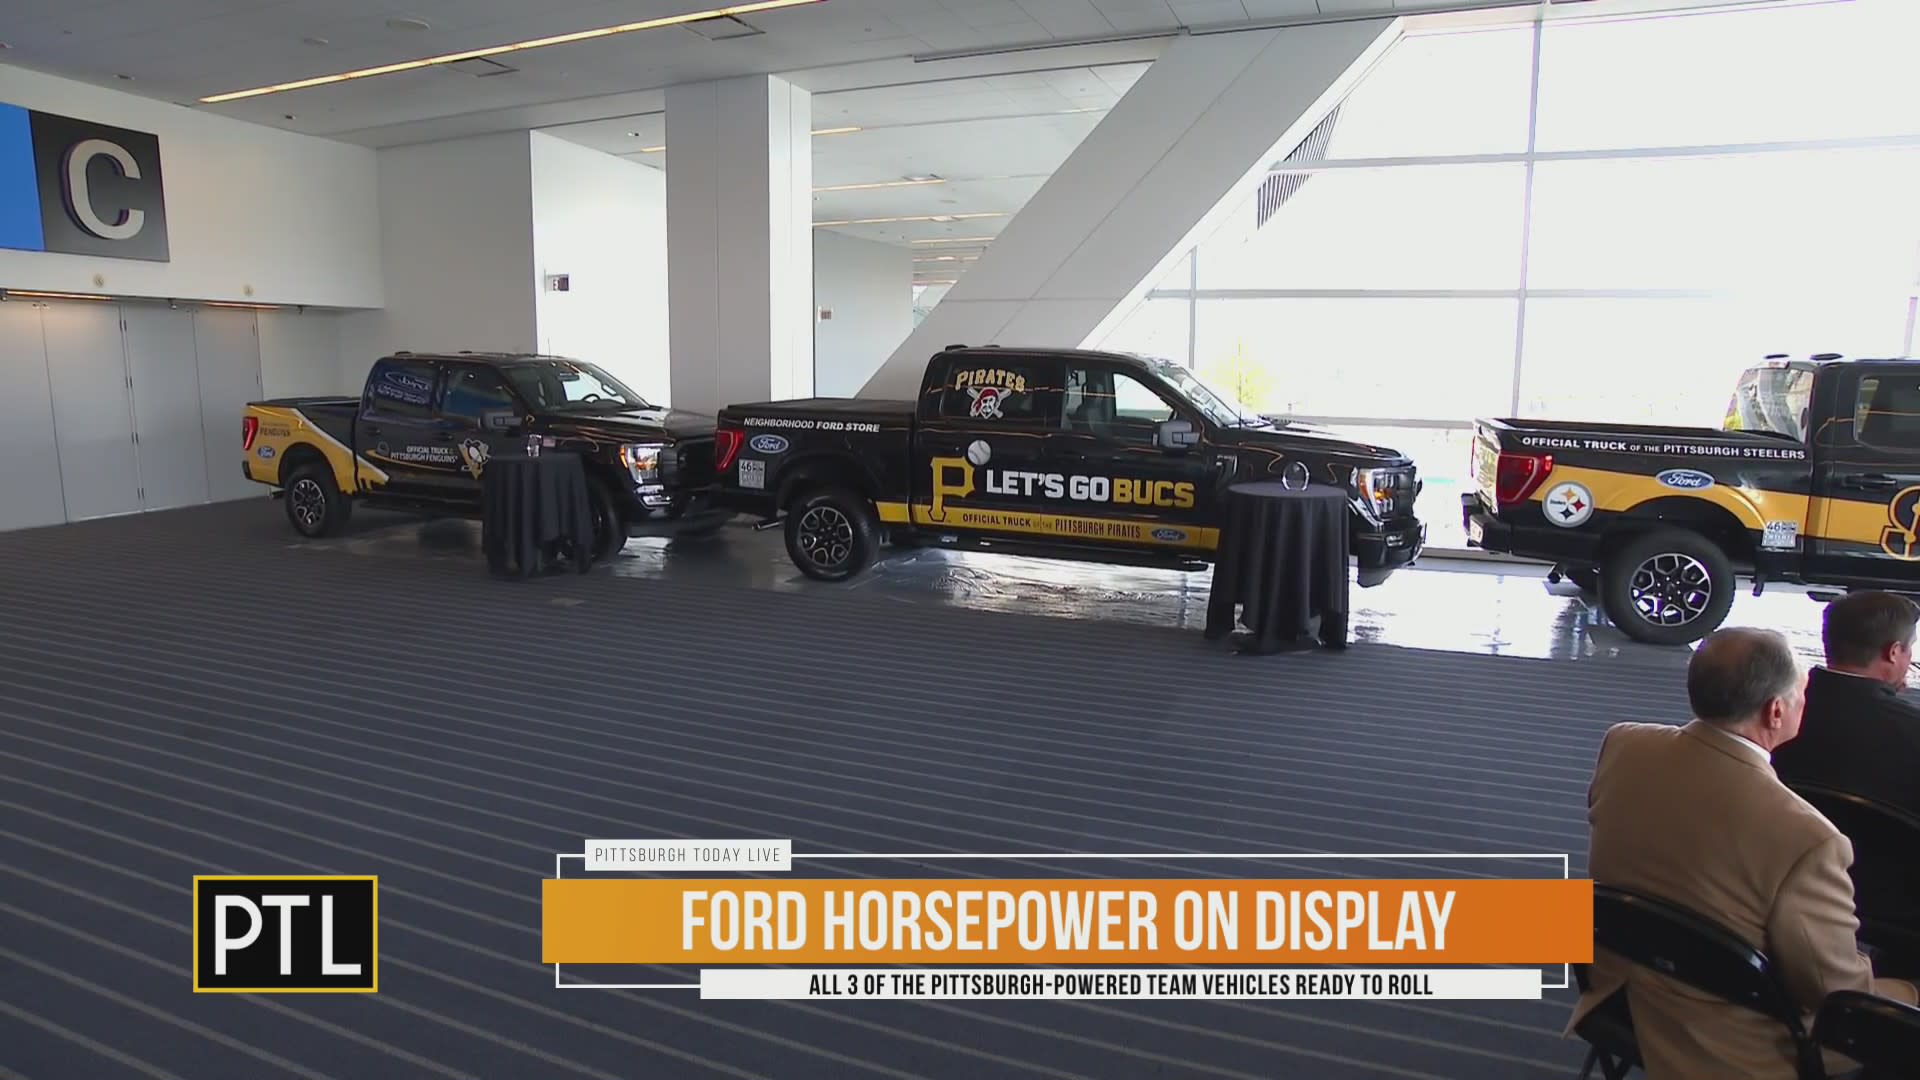 Pirates partner with Neighborhood Ford Store - Pittsburgh Business